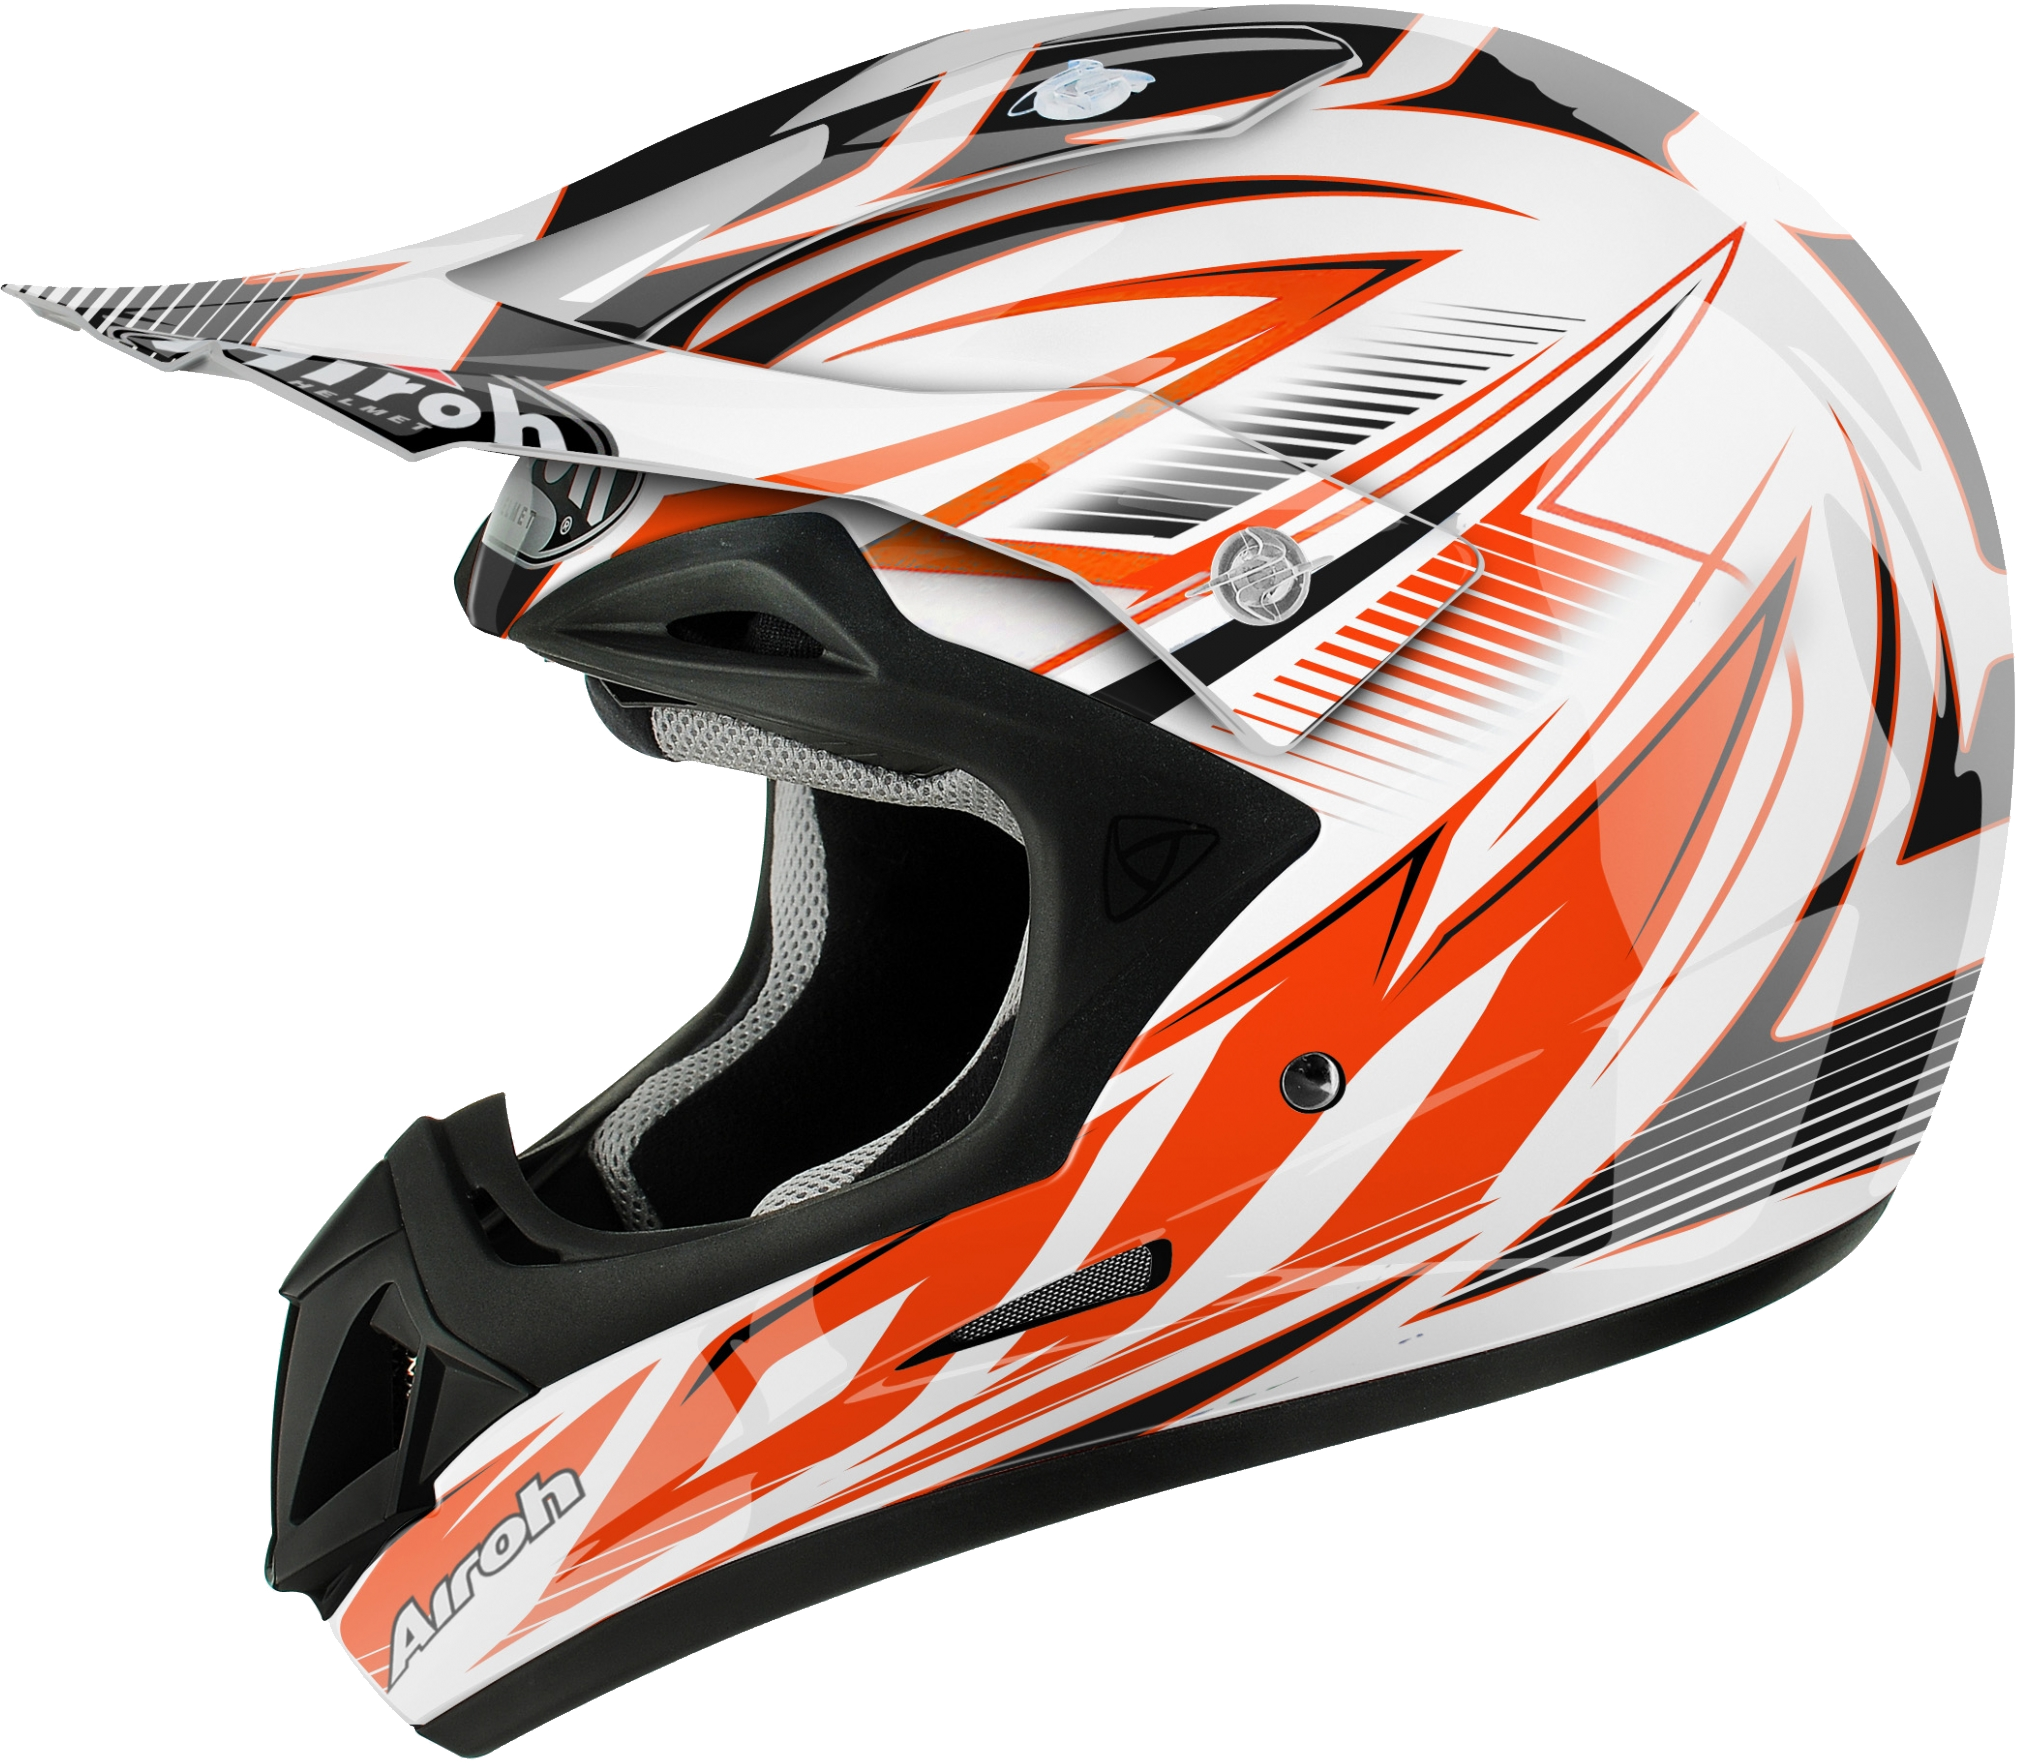 Full Face Bicycle Helmet Png Image - Sports Personal, Transparent background PNG HD thumbnail